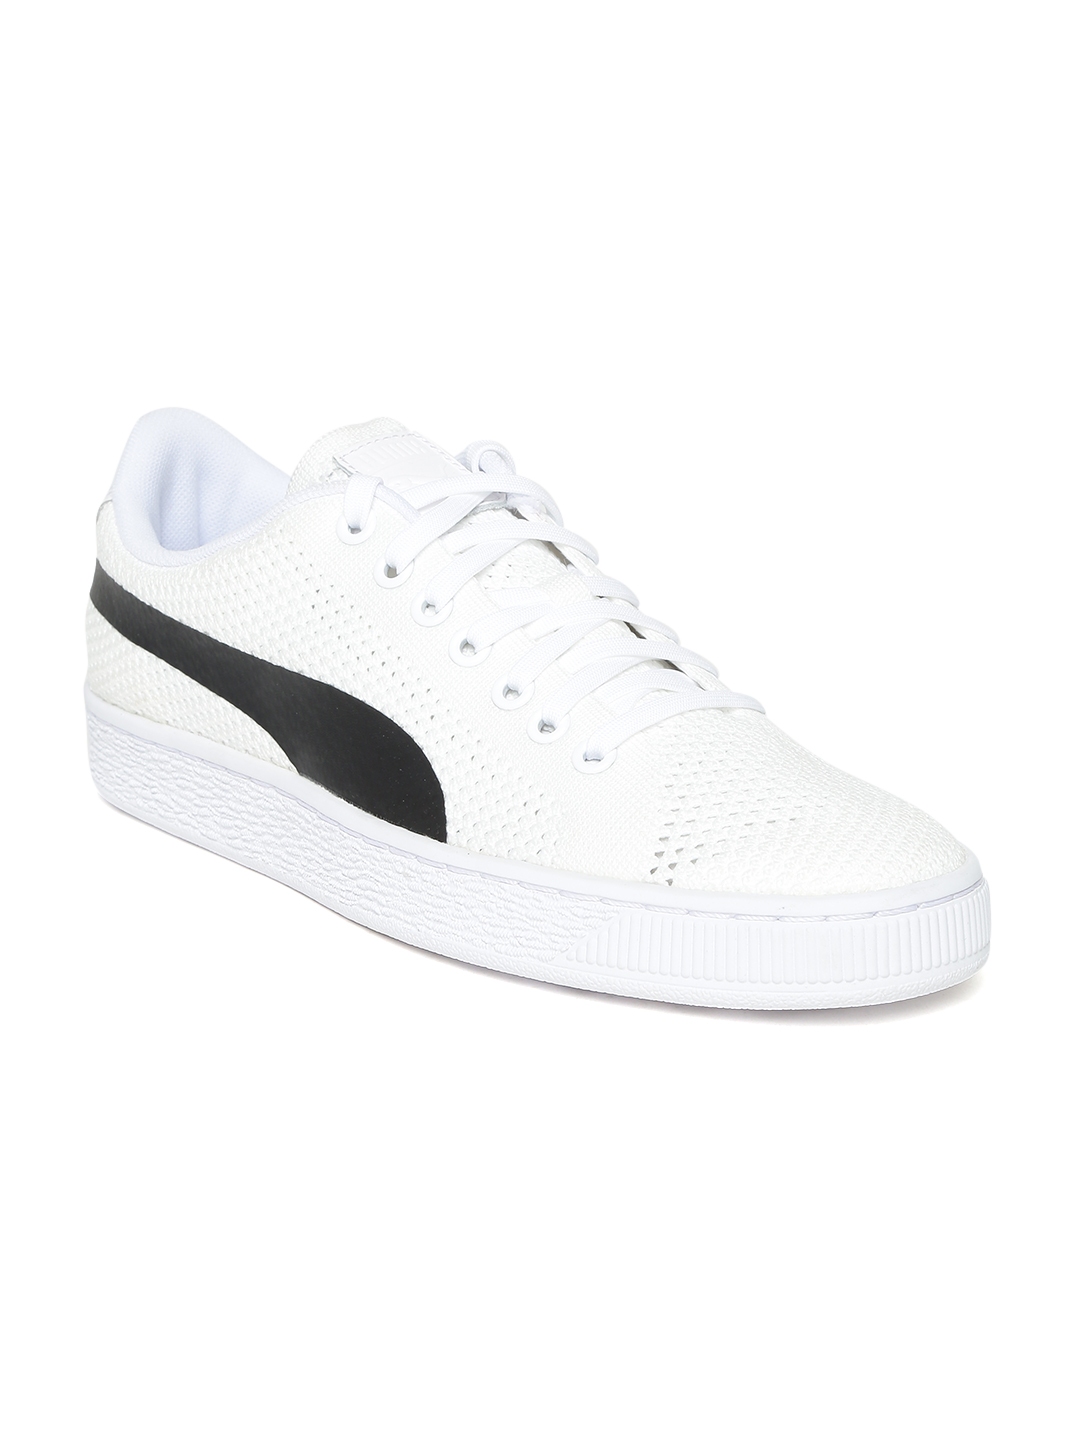 Buy Puma Unisex White Basket Classic EvoKNIT Sneakers - Casual Shoes ...